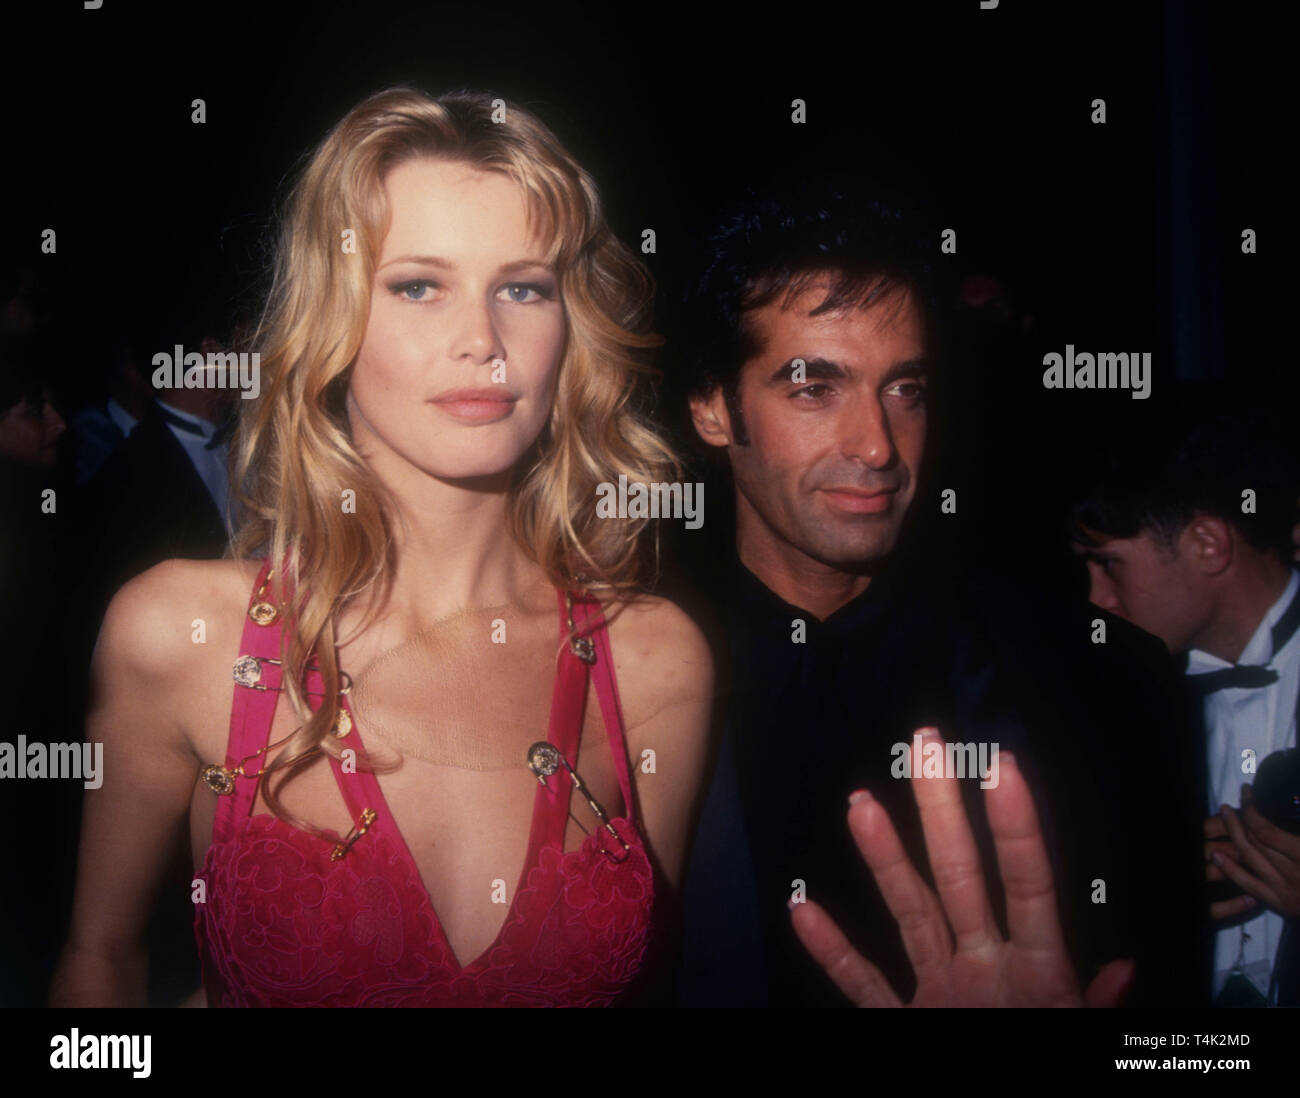 Los Angeles, California, USA 21st March 1994  Model Claudia Schiffer and magician David Copperfield attend the 66th Annual Academy Awards on March 21, 1994 at Dorothy Chandler Pavilion in Los Angeles, California, USA. Photo by Barry King/Alamy Stock Photo Stock Photo